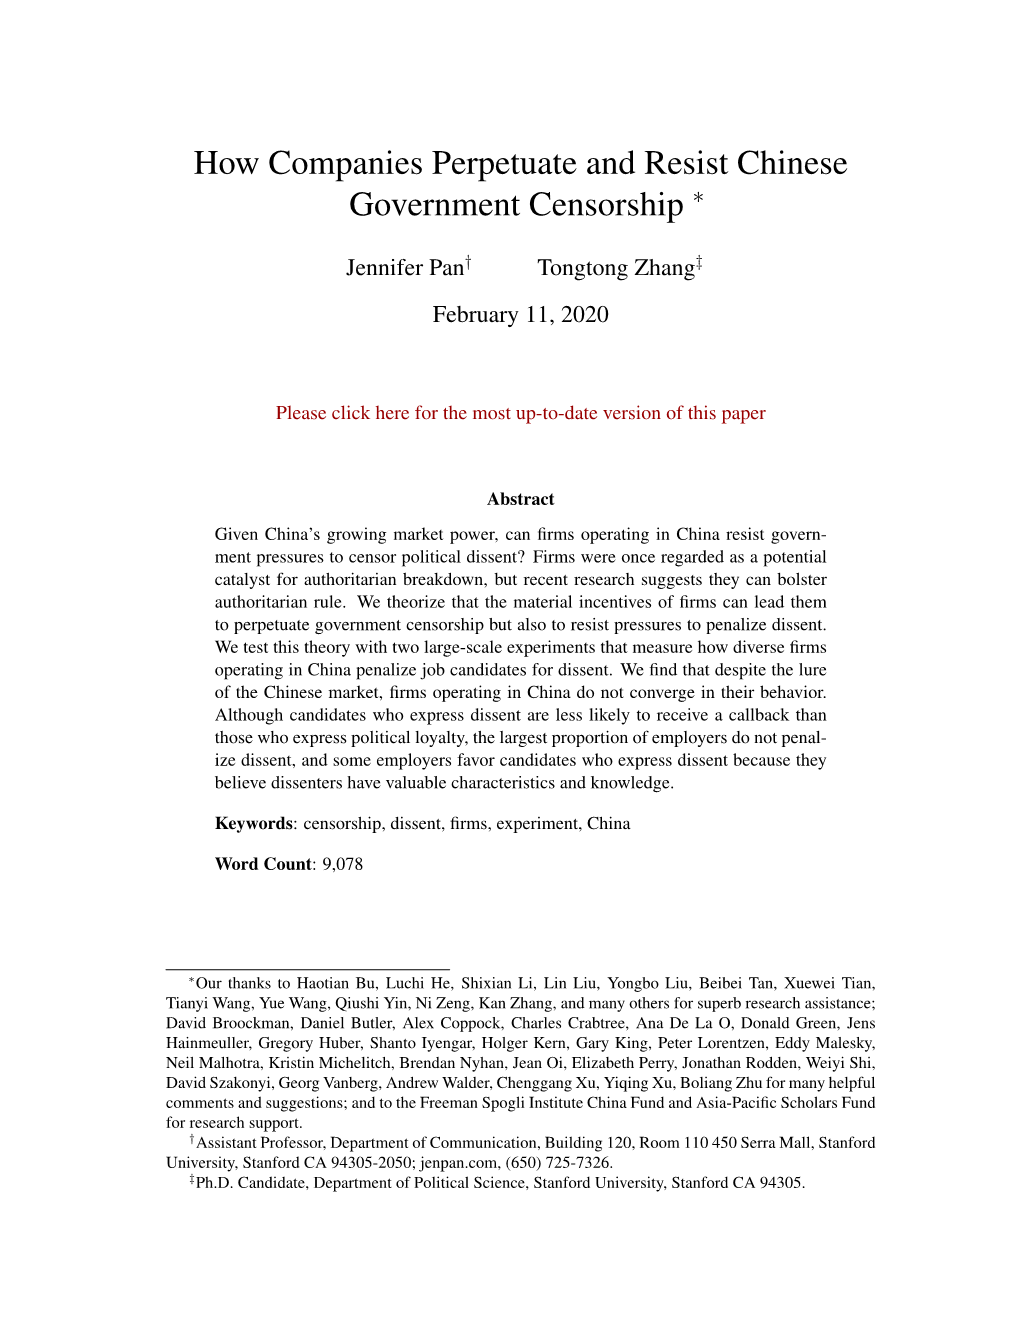 How Companies Perpetuate and Resist Chinese Government Censorship ∗